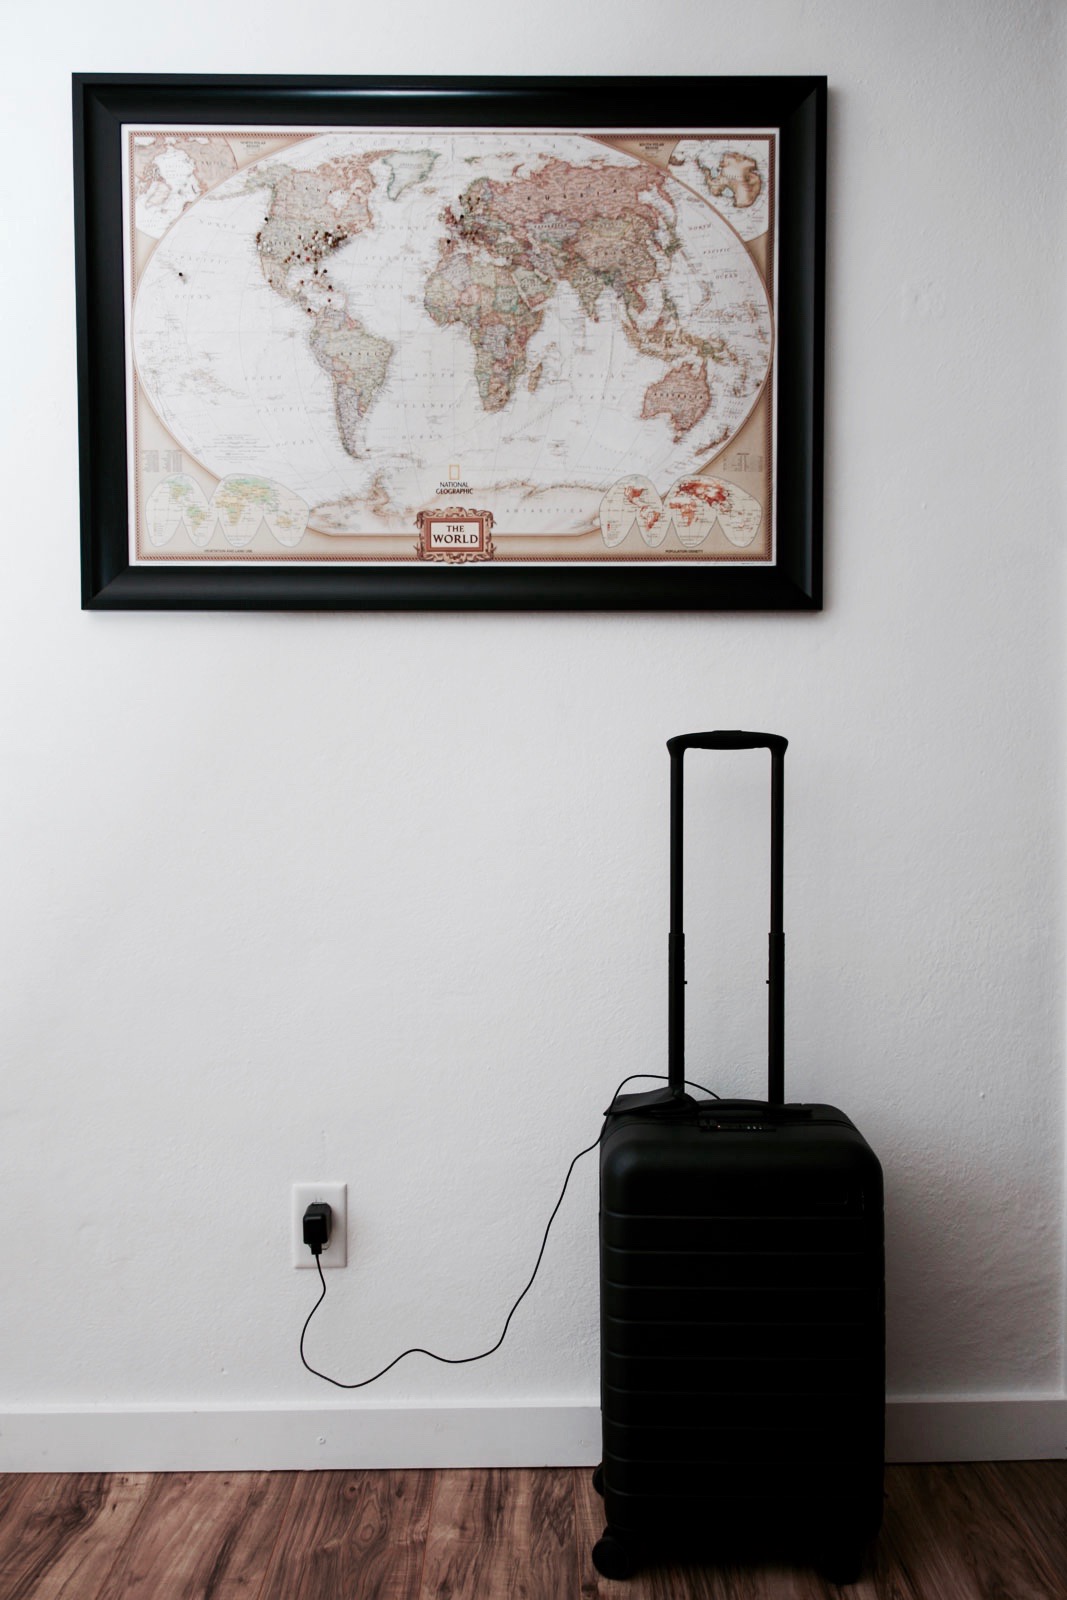 The Away carry-on suitcase charges using an outlet placed by a pin map